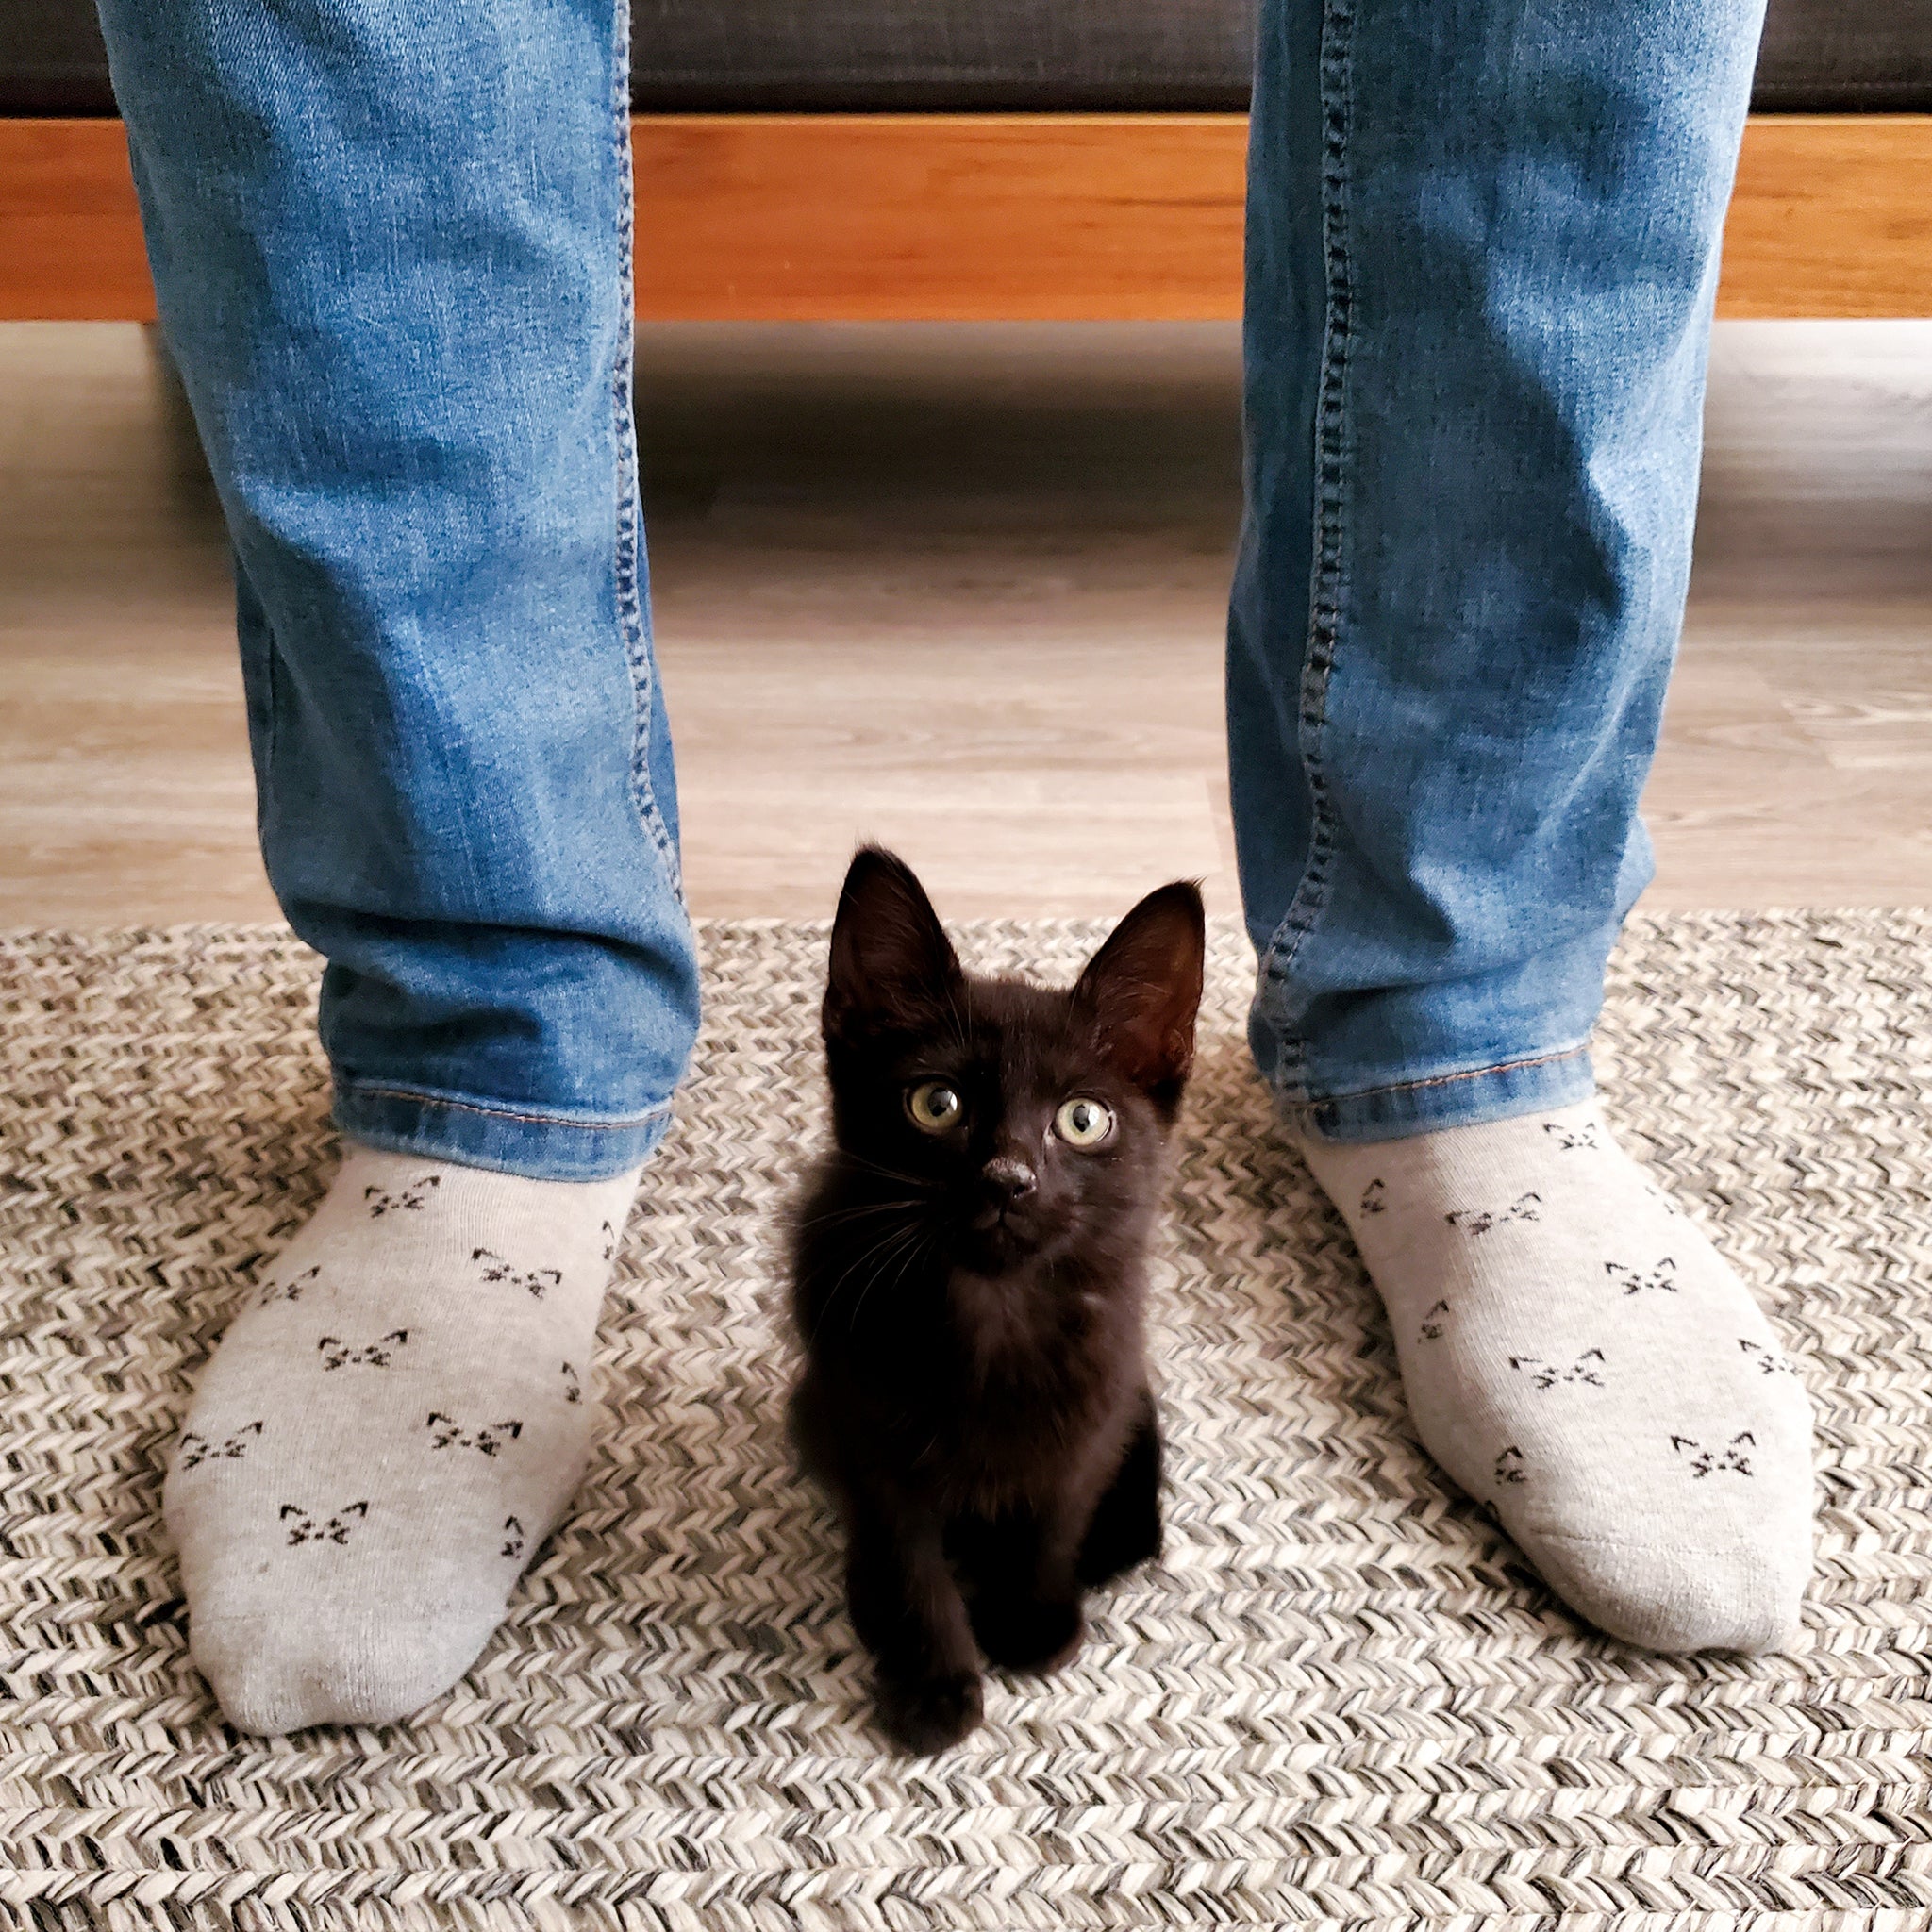 Save Cats with Every Purchase  Sustainable Socks for a Cause – Conscious  Step